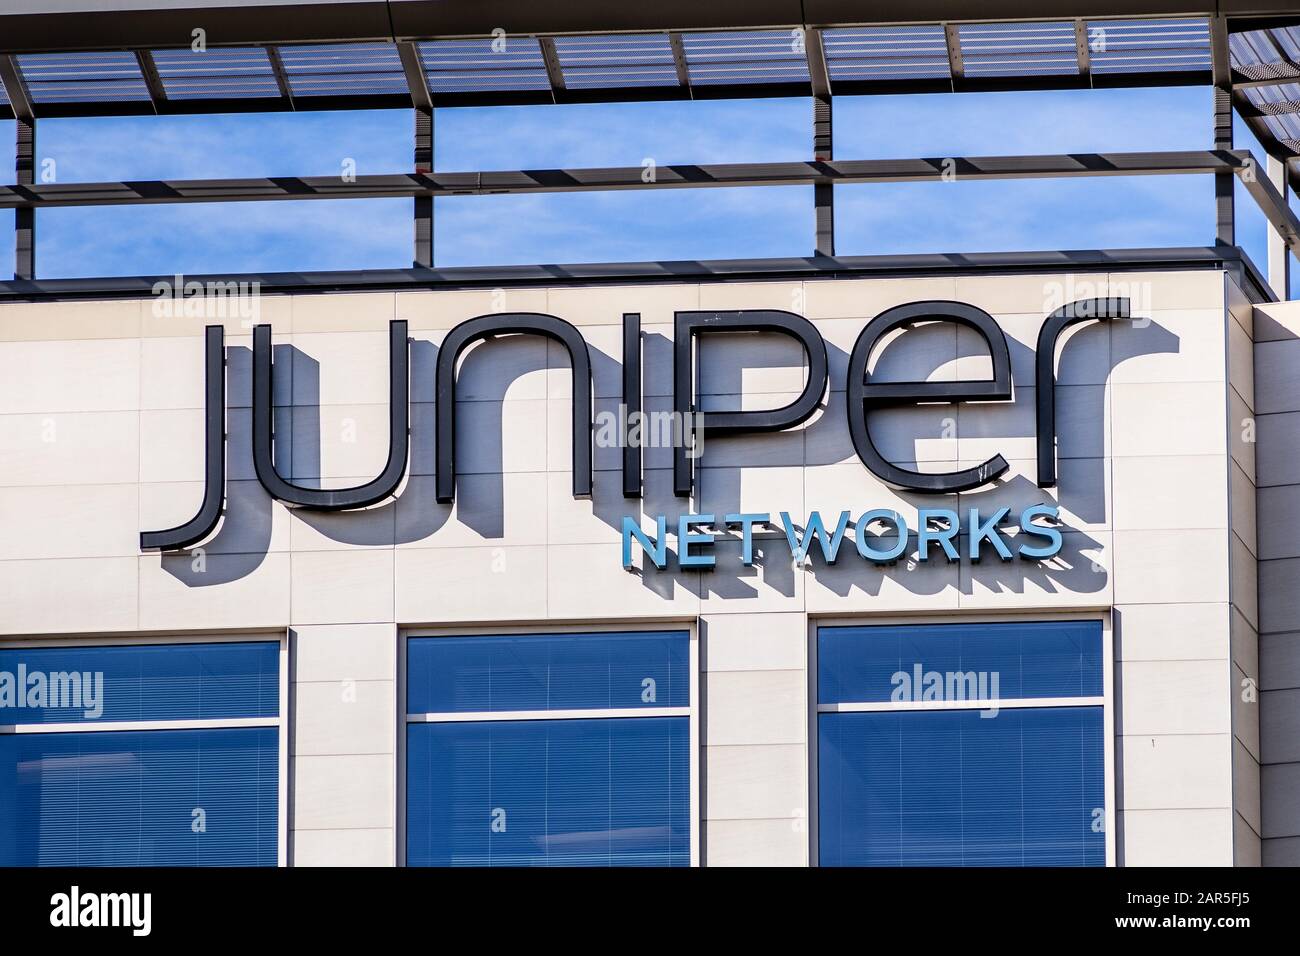 Jan 24, 2020 Sunnyvale / CA / USA - Juniper Networks sign at the Company's corporate headquarters located in Silicon Valley. Juniper Networks, Inc. is Stock Photo